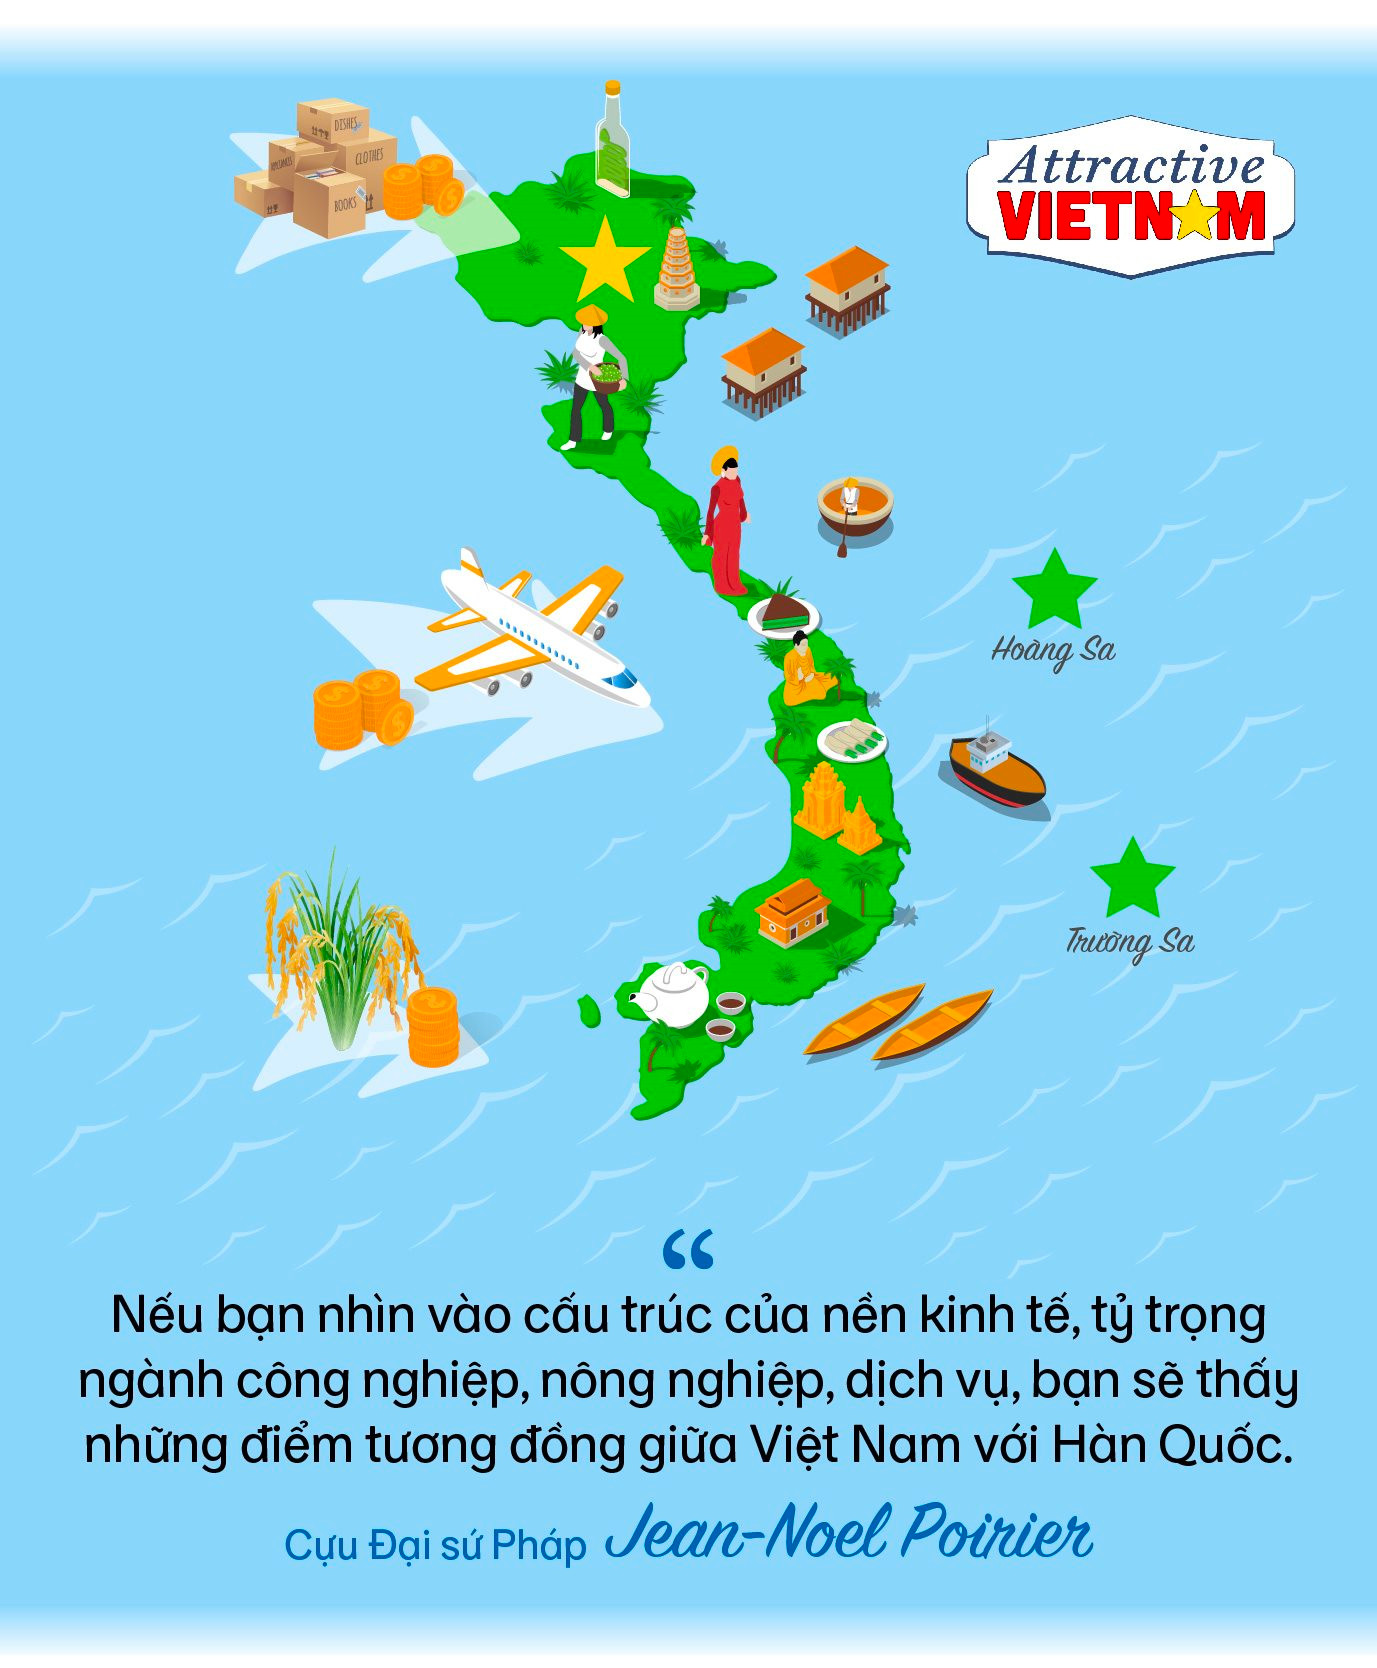 vn-quote-2-web.jpg